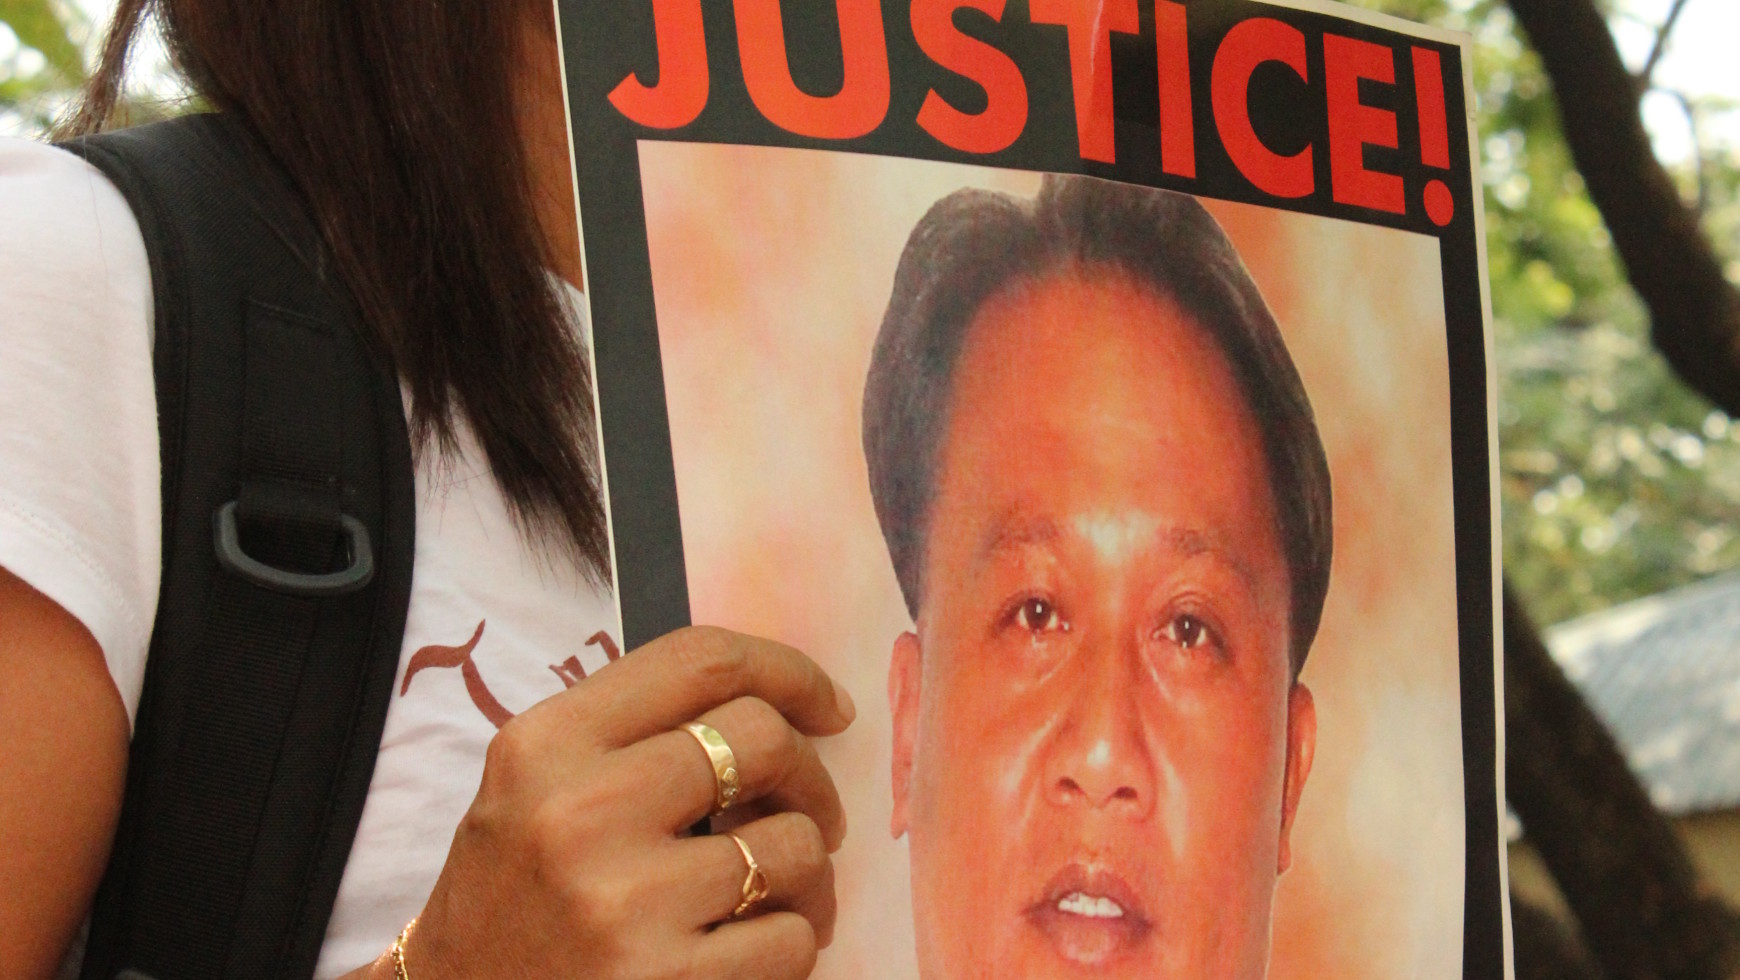 CA Dismisses Arroyo Plea to Stop Php 5.4M Suit over Extra-Judicial Killings